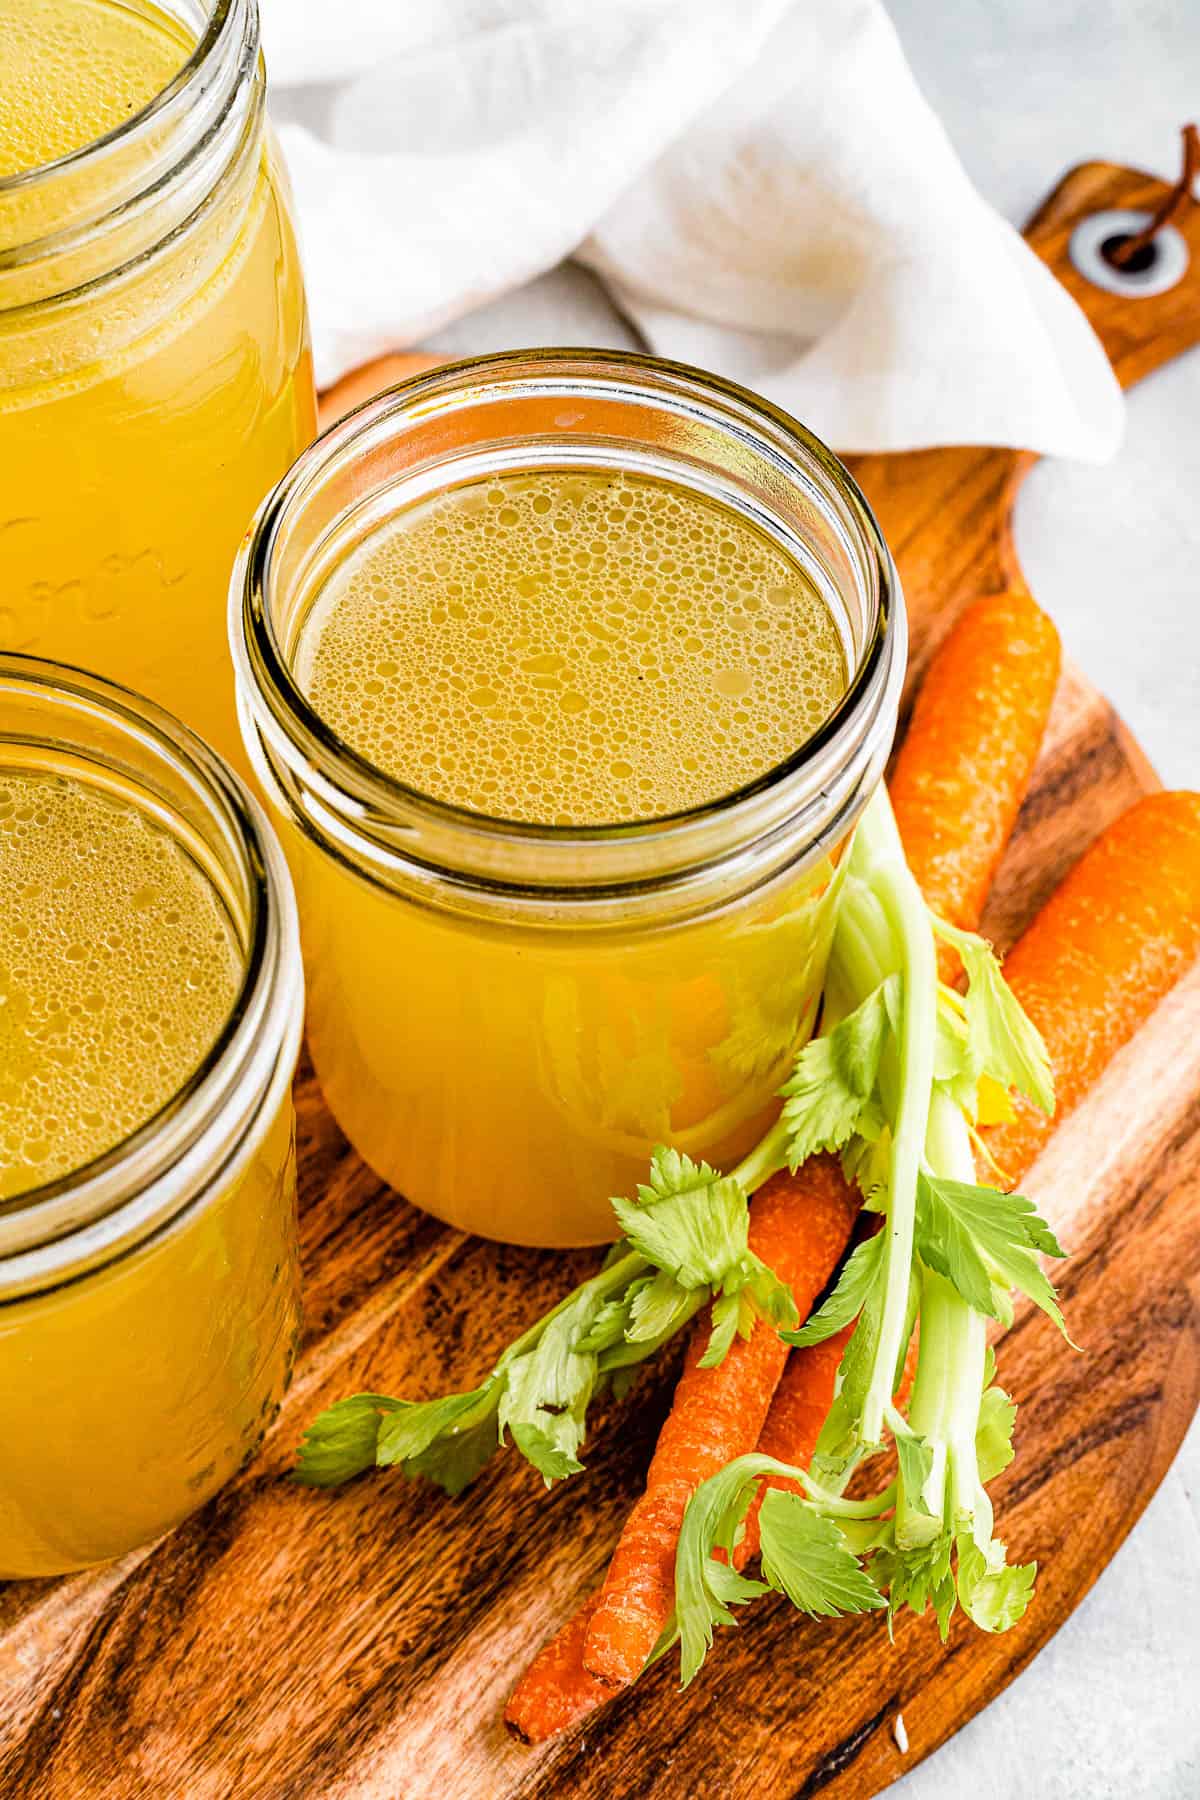 Three jars of chicken broth on a cutting board with raw carrots nearby.